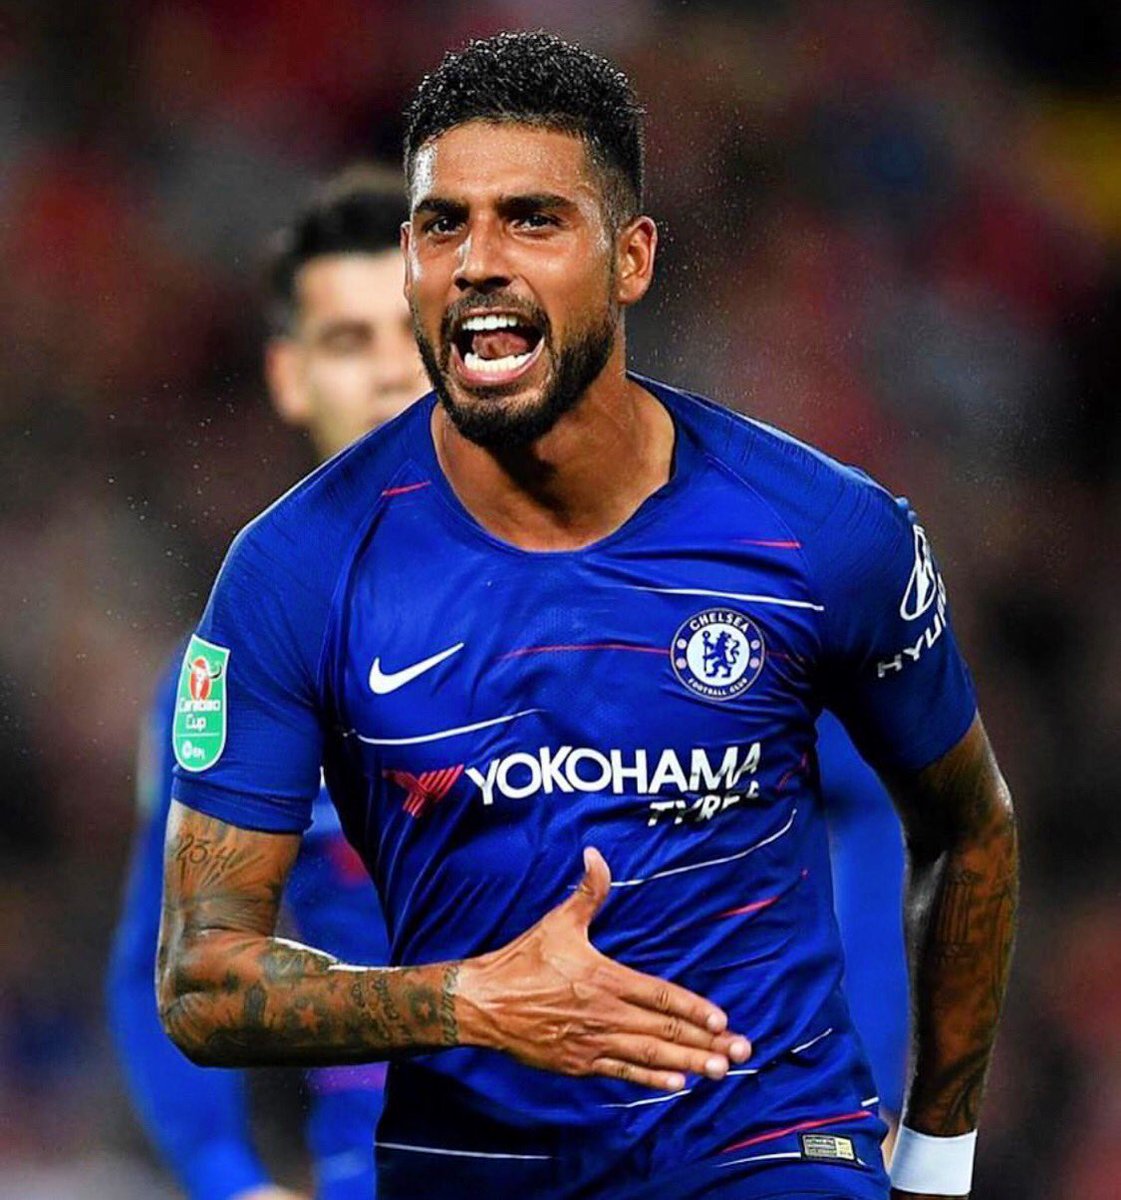 Emerson Palmieri On Twitter What A Great Night What A Moment First Goal Qualification And Very Happy To Play My First 90min This Season Well Done Blues Https T Co Msjdailf74